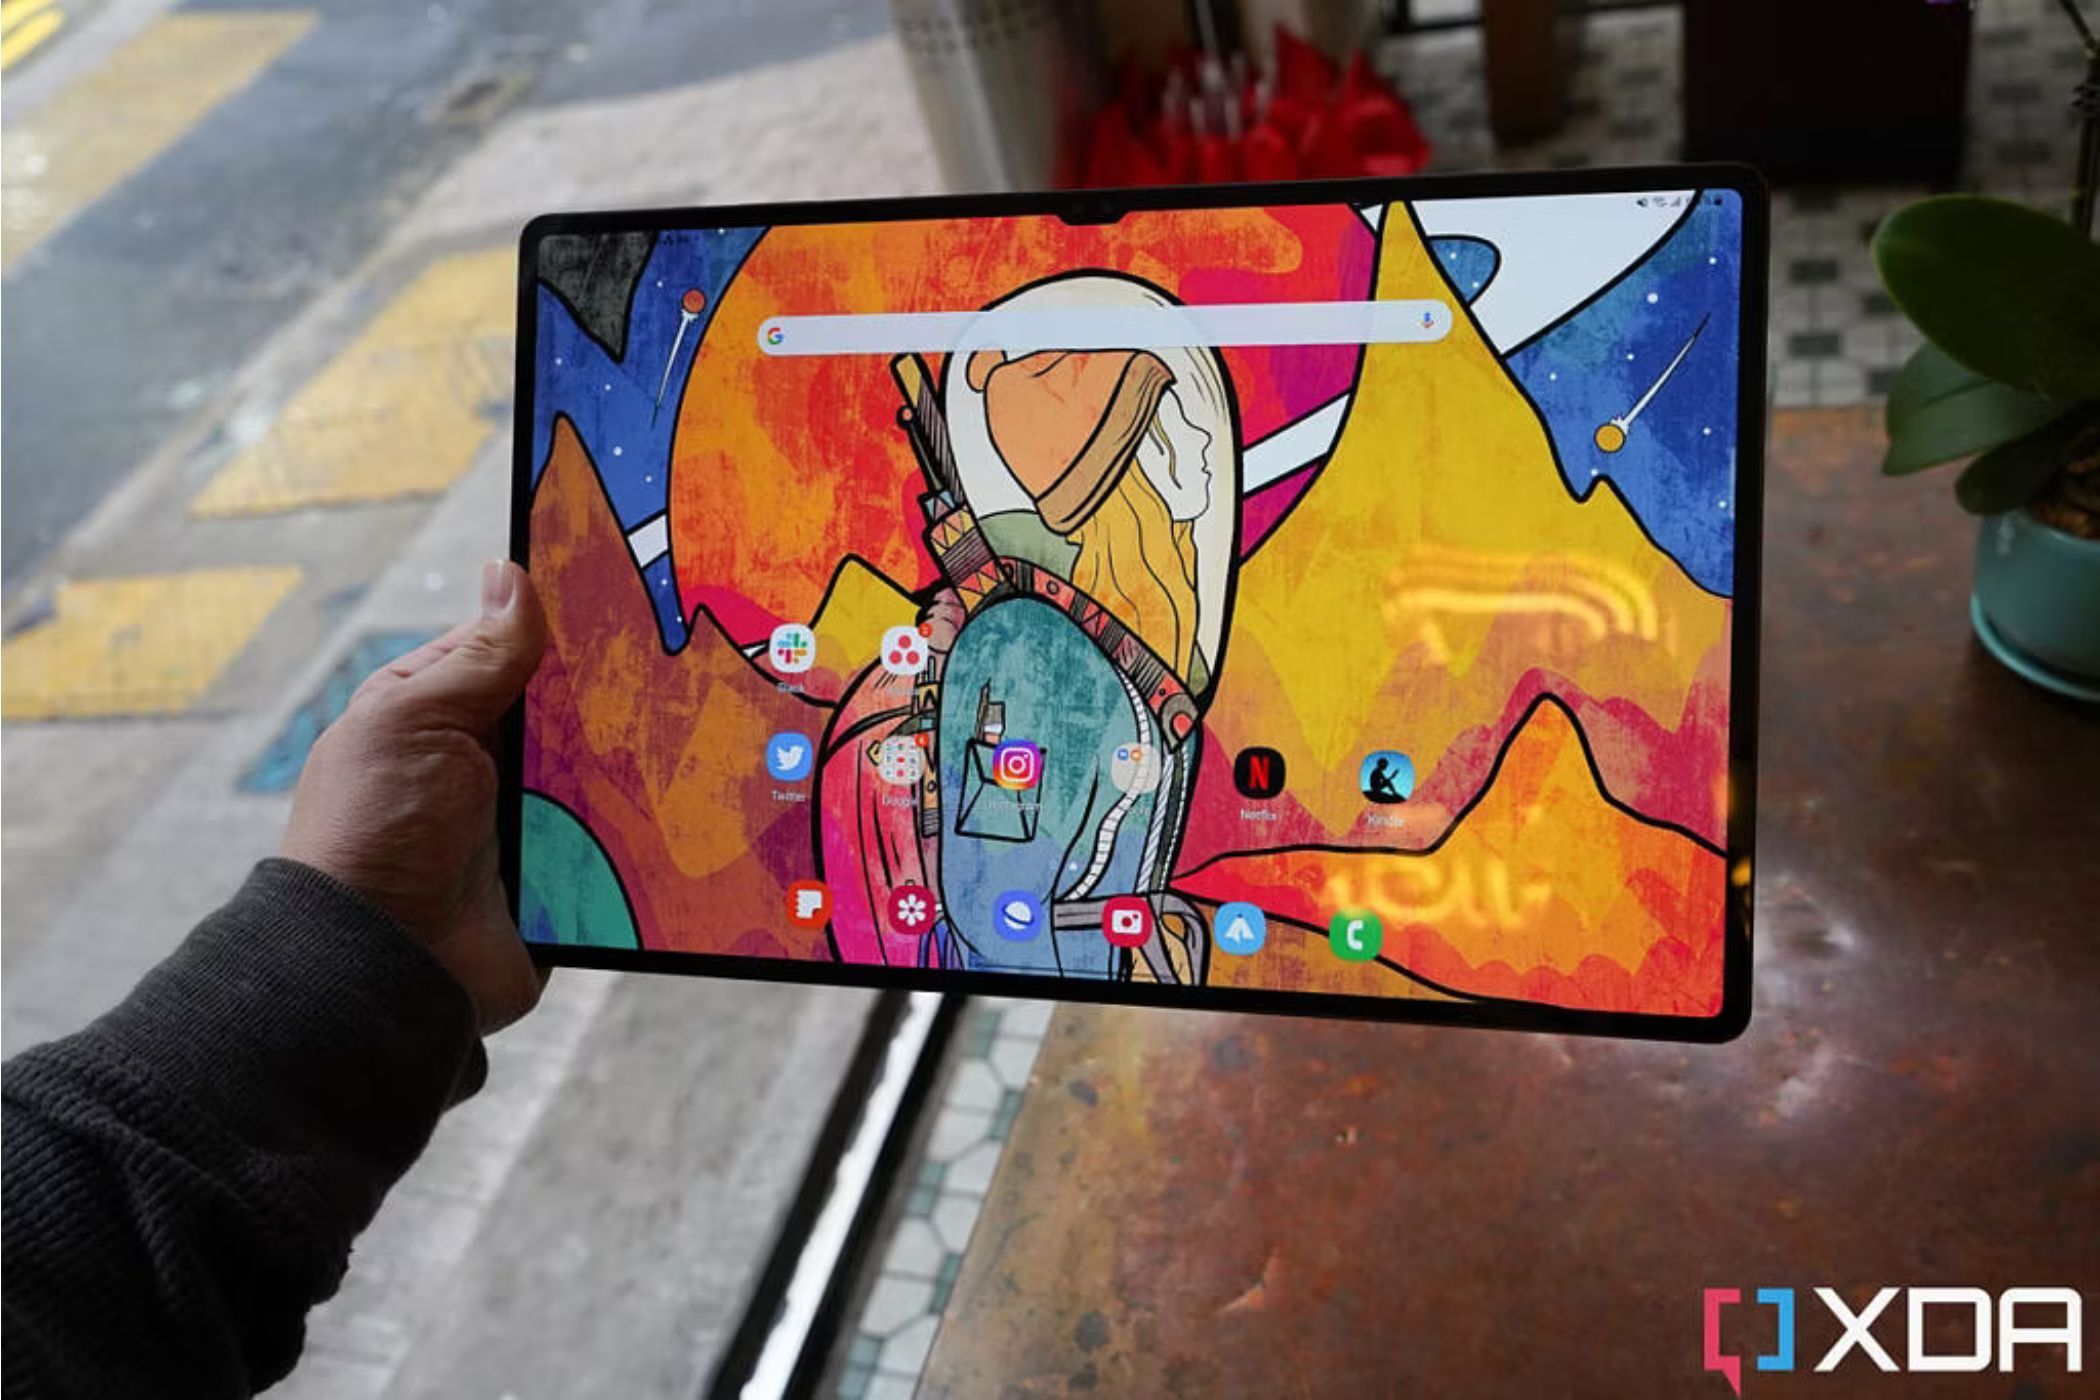 An image showing a person holding a Samsung Galaxy Tab S8 Ultra tablet.